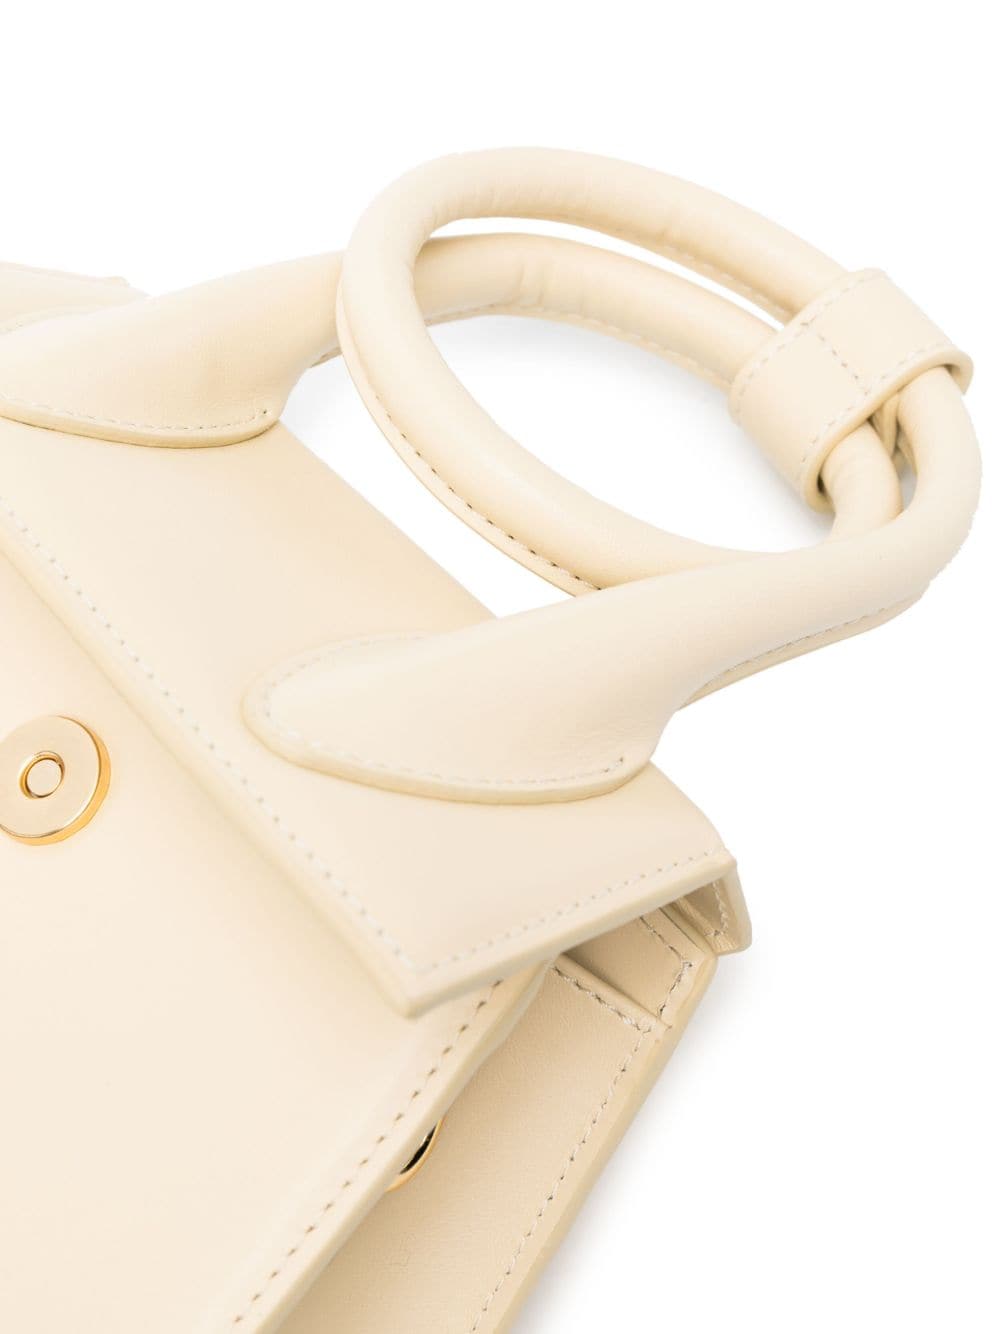 JACQUEMUS Ivory White Coiled Handbag with Single Handle and Detachable Strap